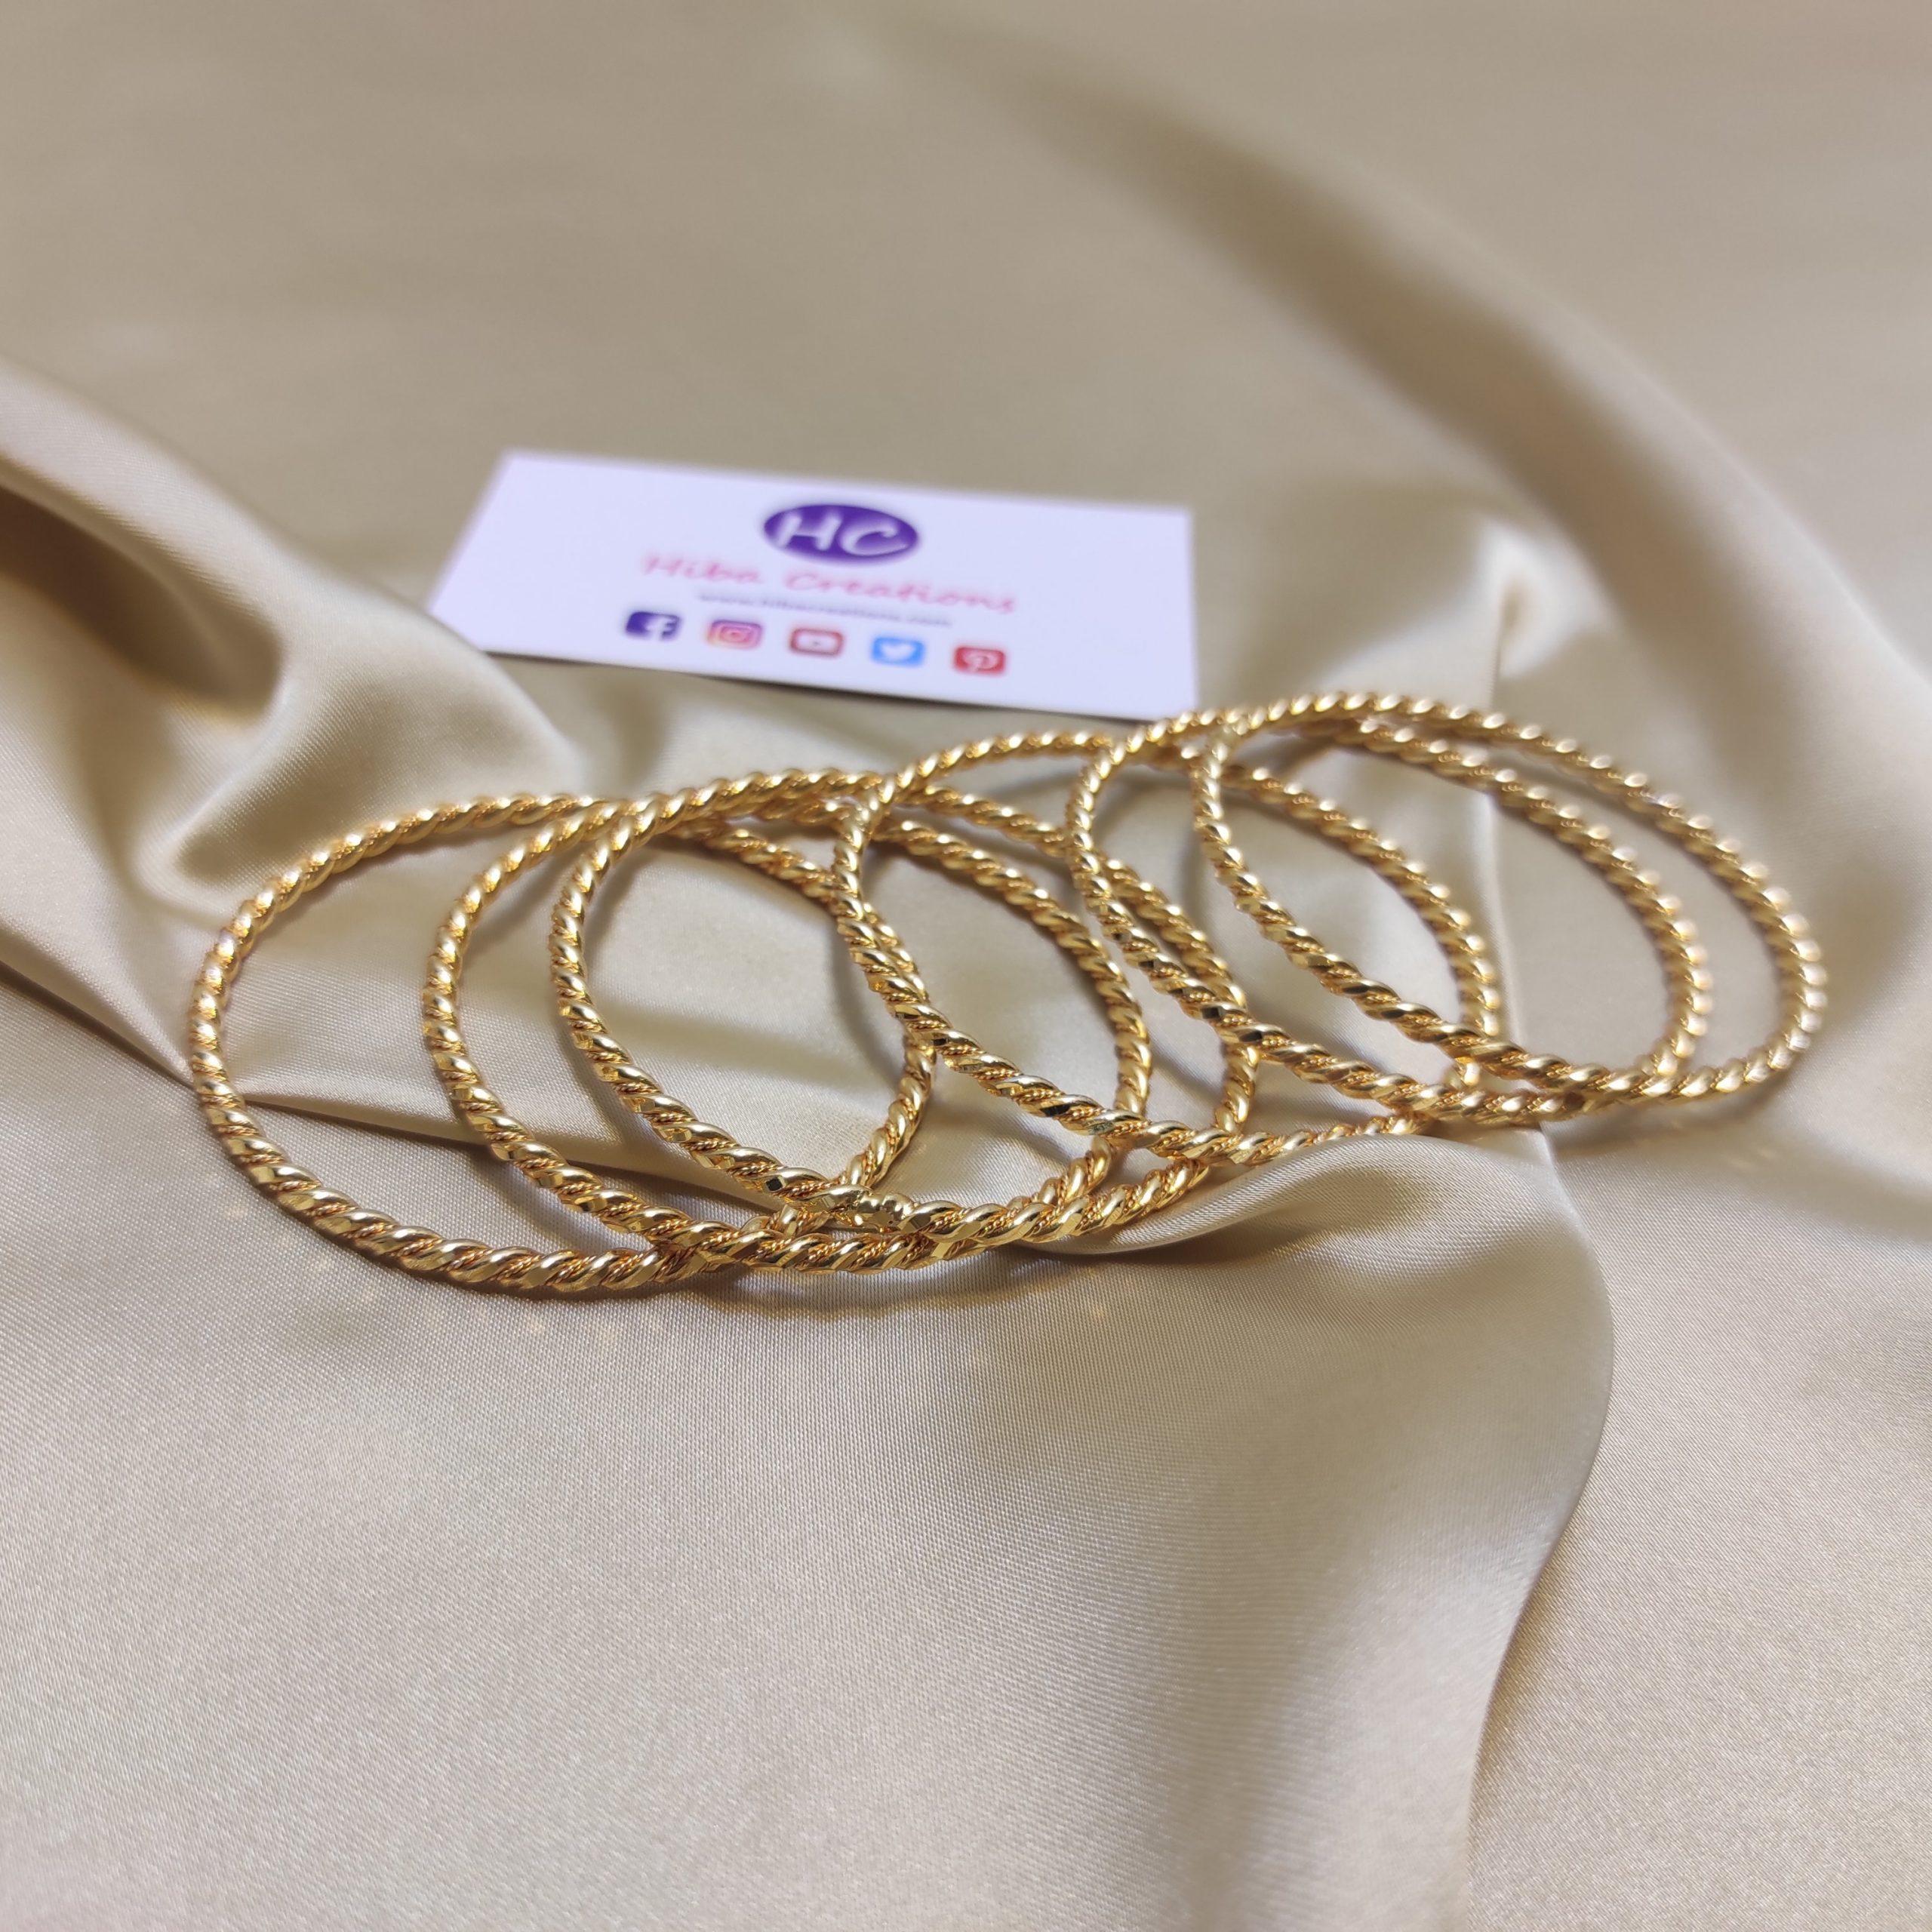 Latest Gold Plated Bangles Set with Price in Pakistan 2022 Online, New Bangles Design for Girls, Wedding Gold Plated Bangles 2022.